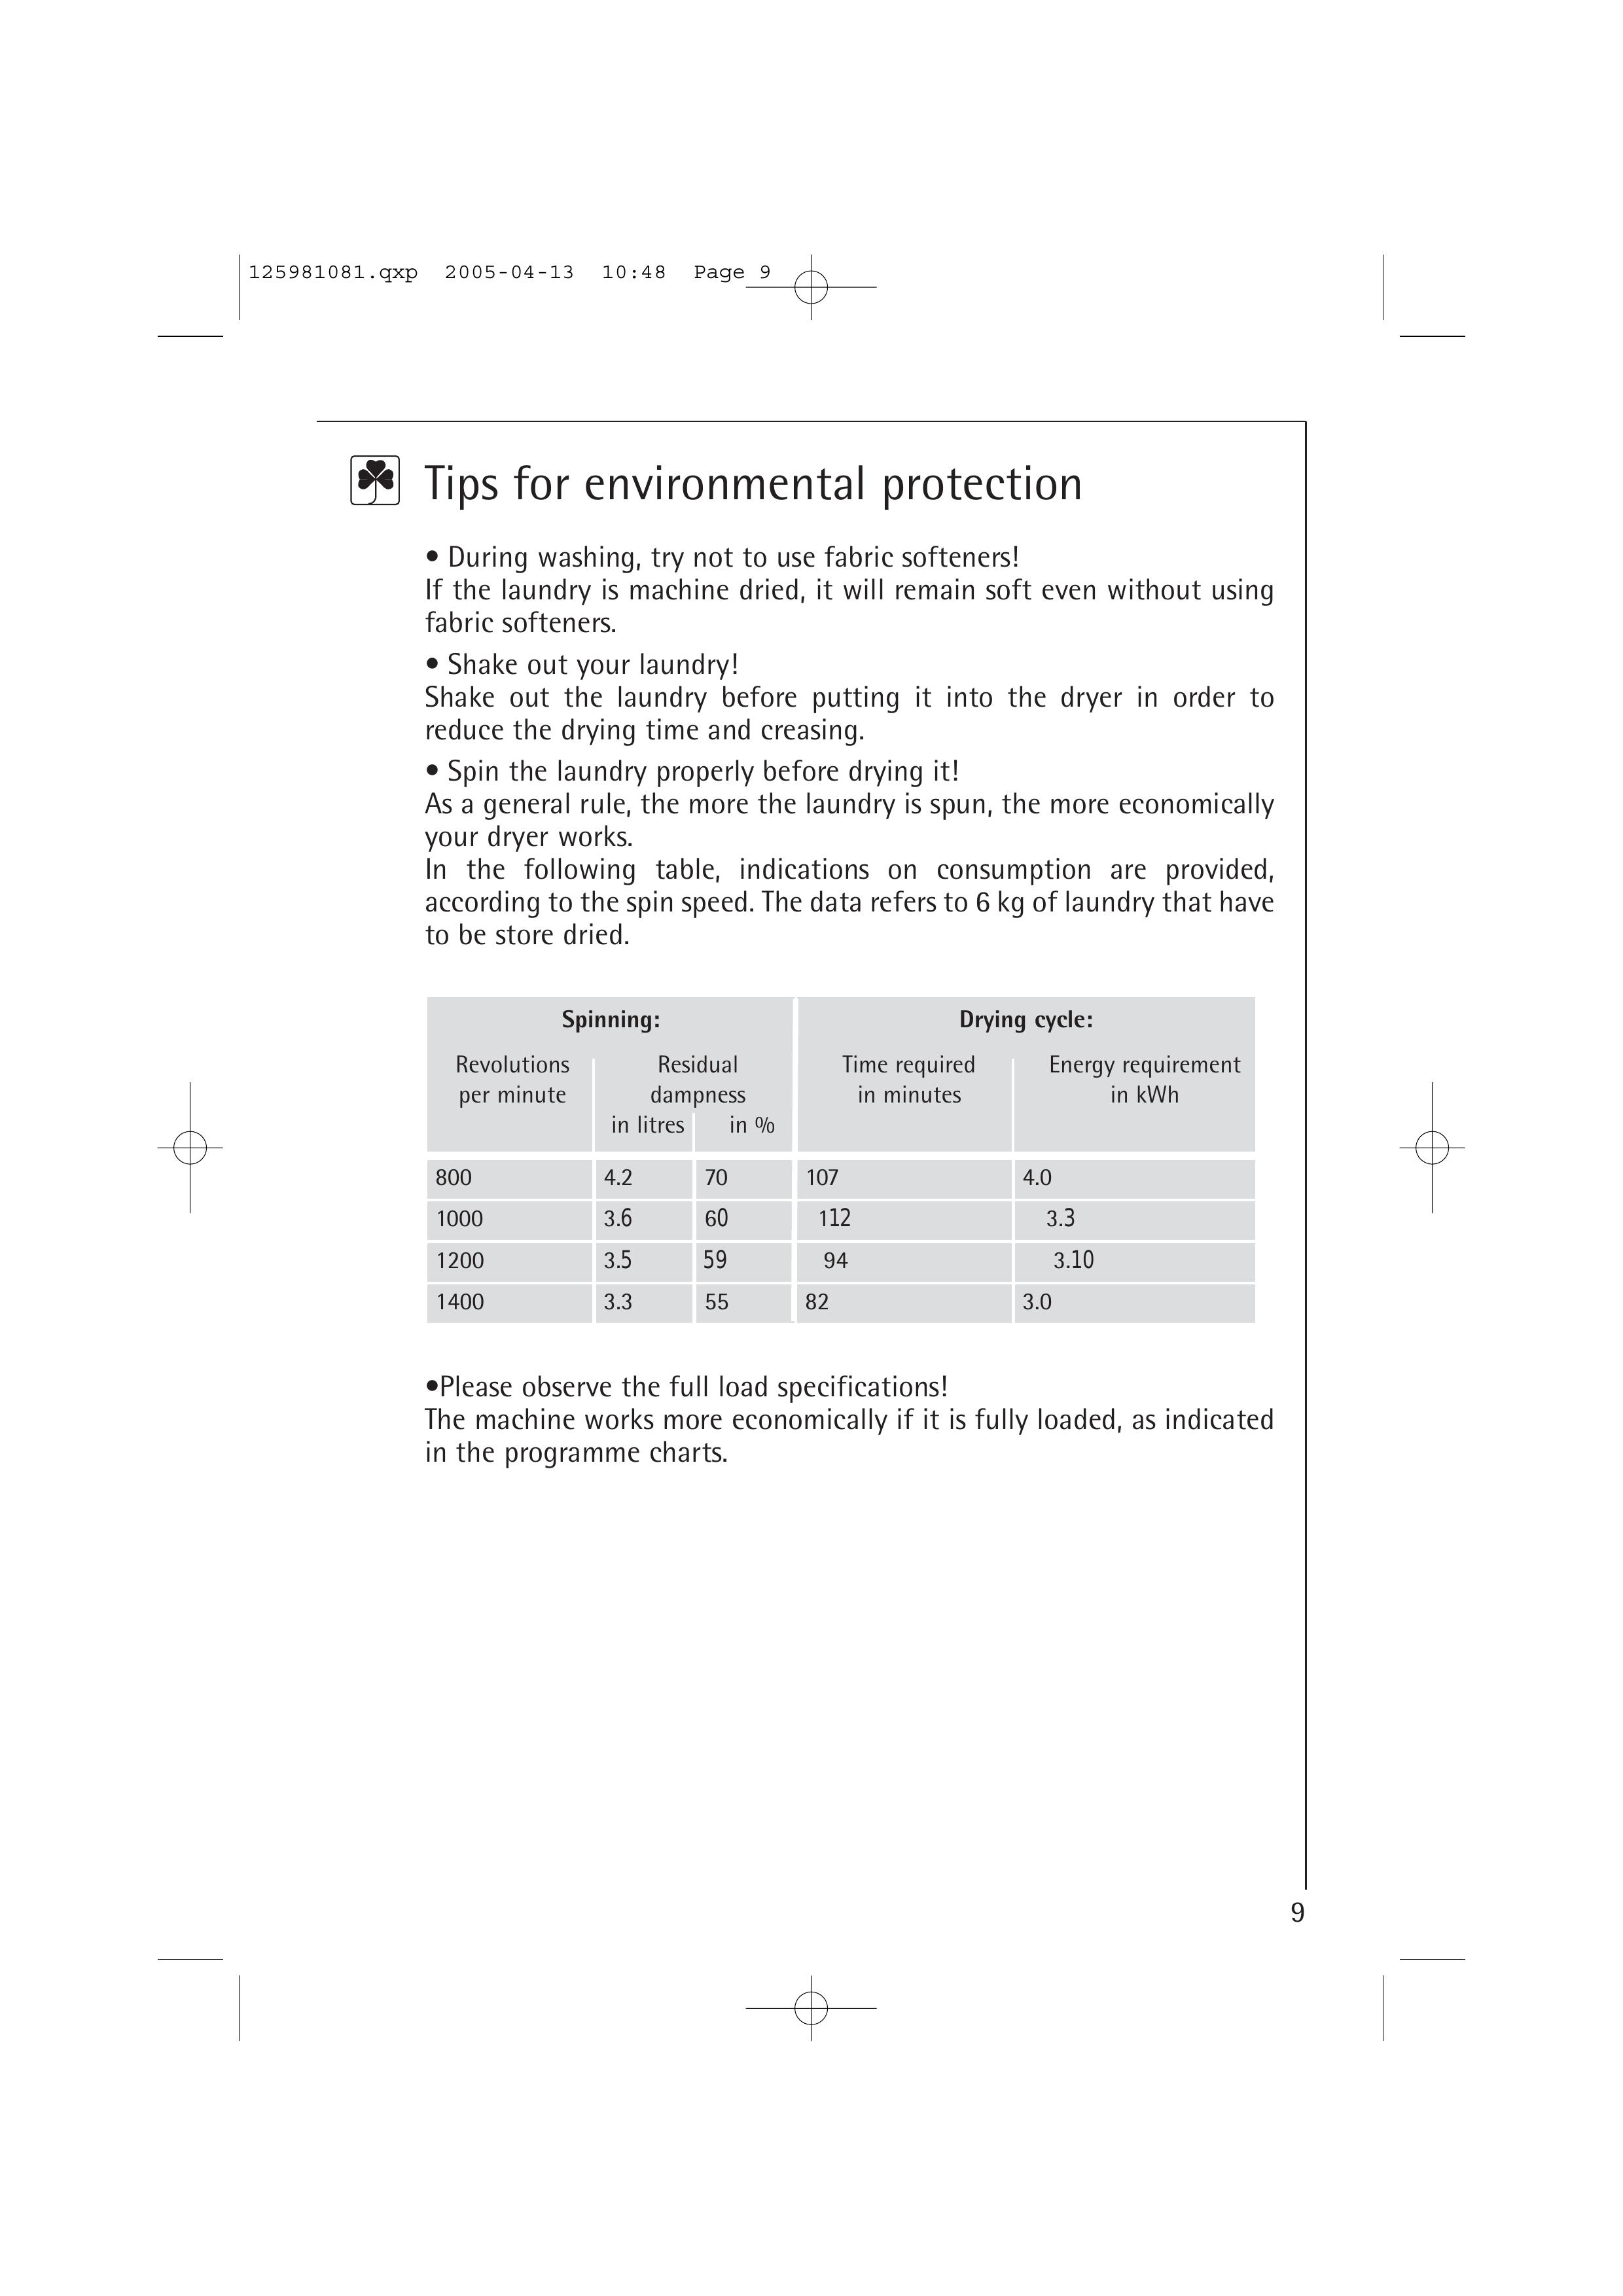 AEG T37400 Clothes Dryer User Manual (Page 9)